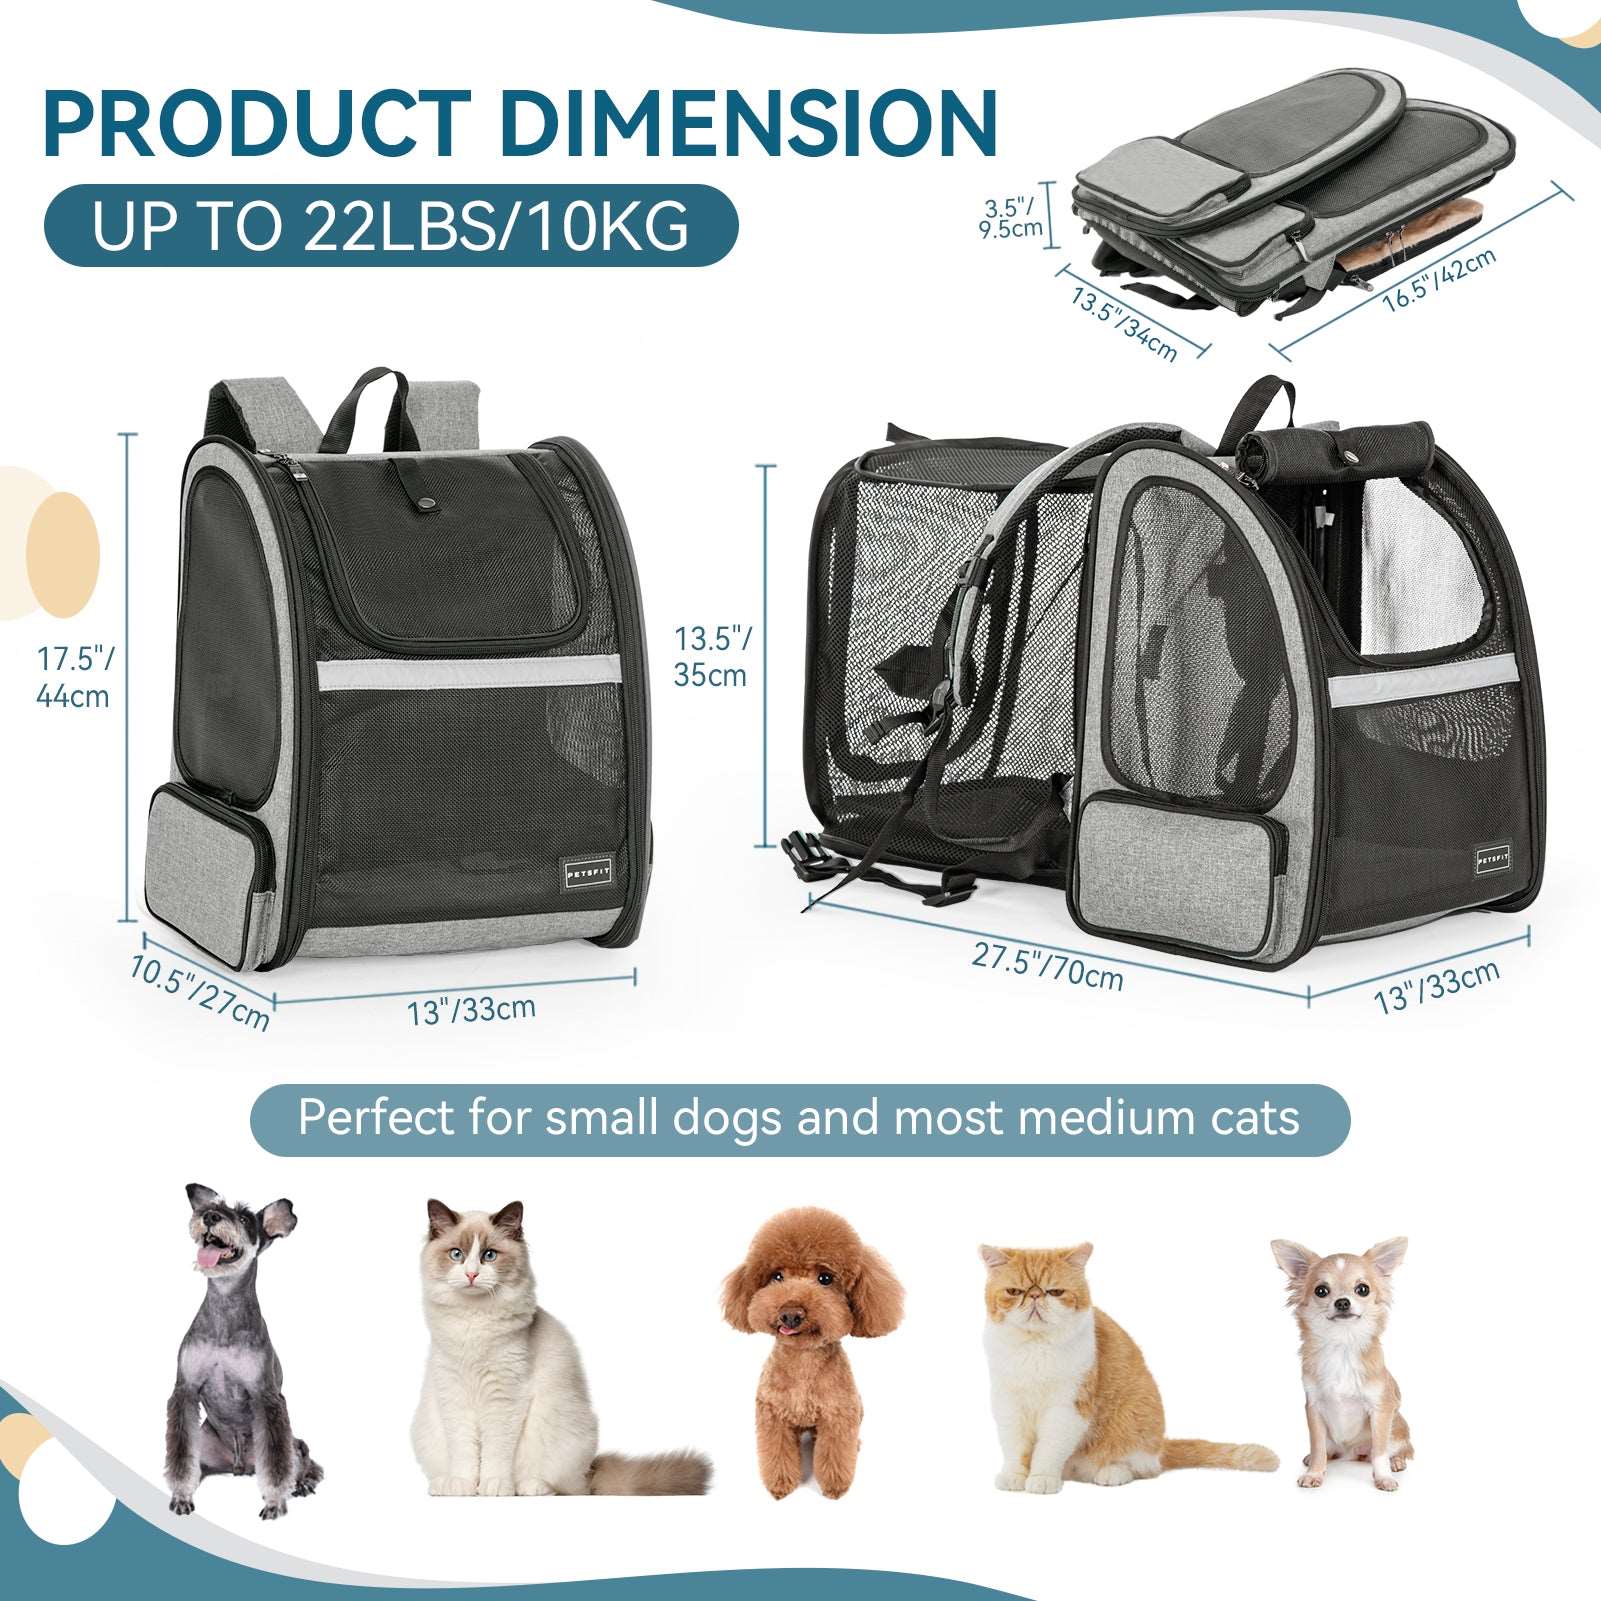 Petsfit-Dog-and-Cat-Backpack-Carrier-Expandable-with-Great-Ventilation-03